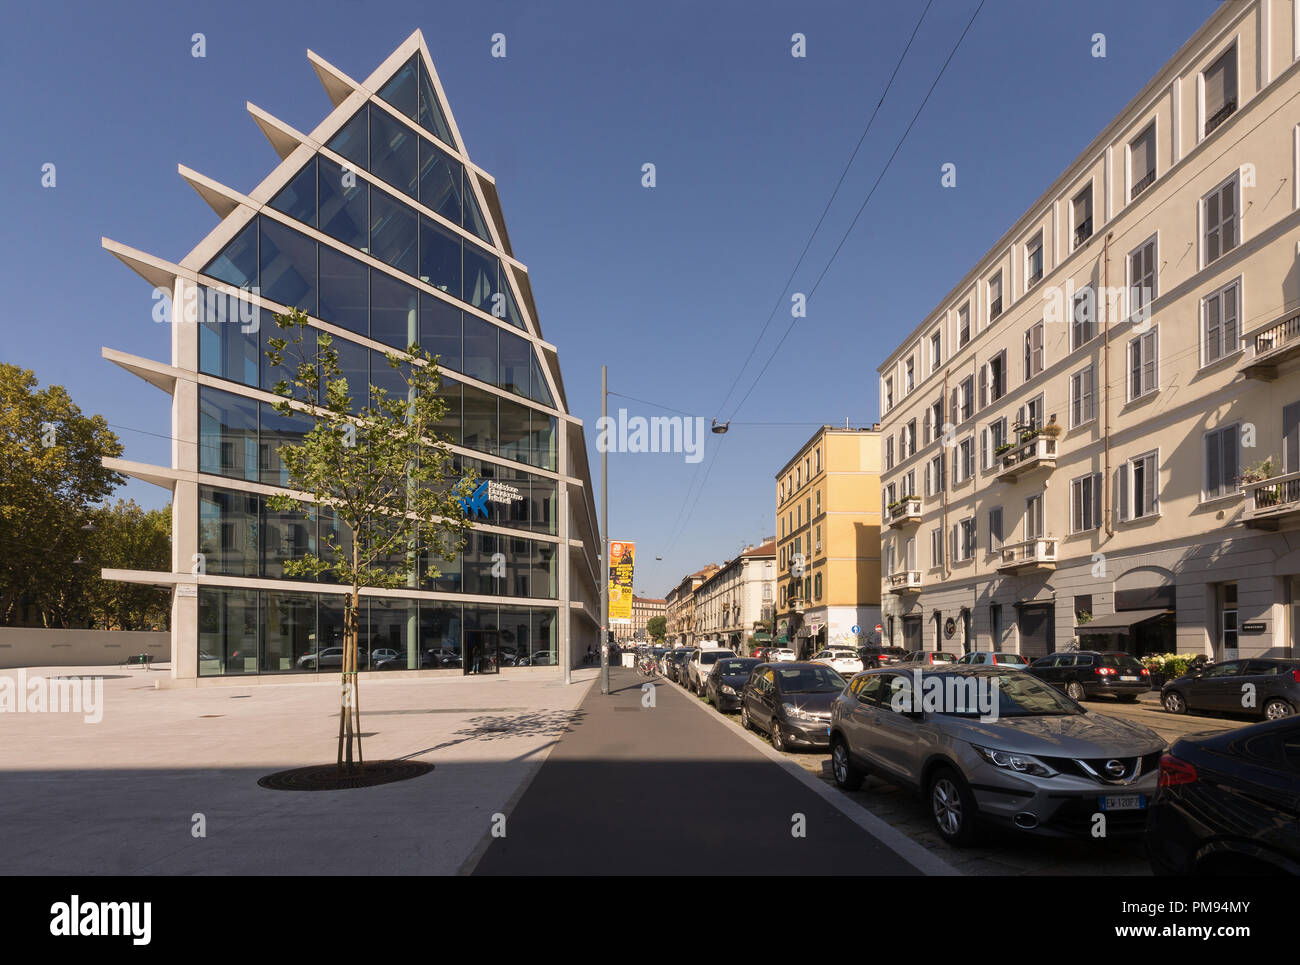 Feltrinelli hi-res stock photography and images - Alamy